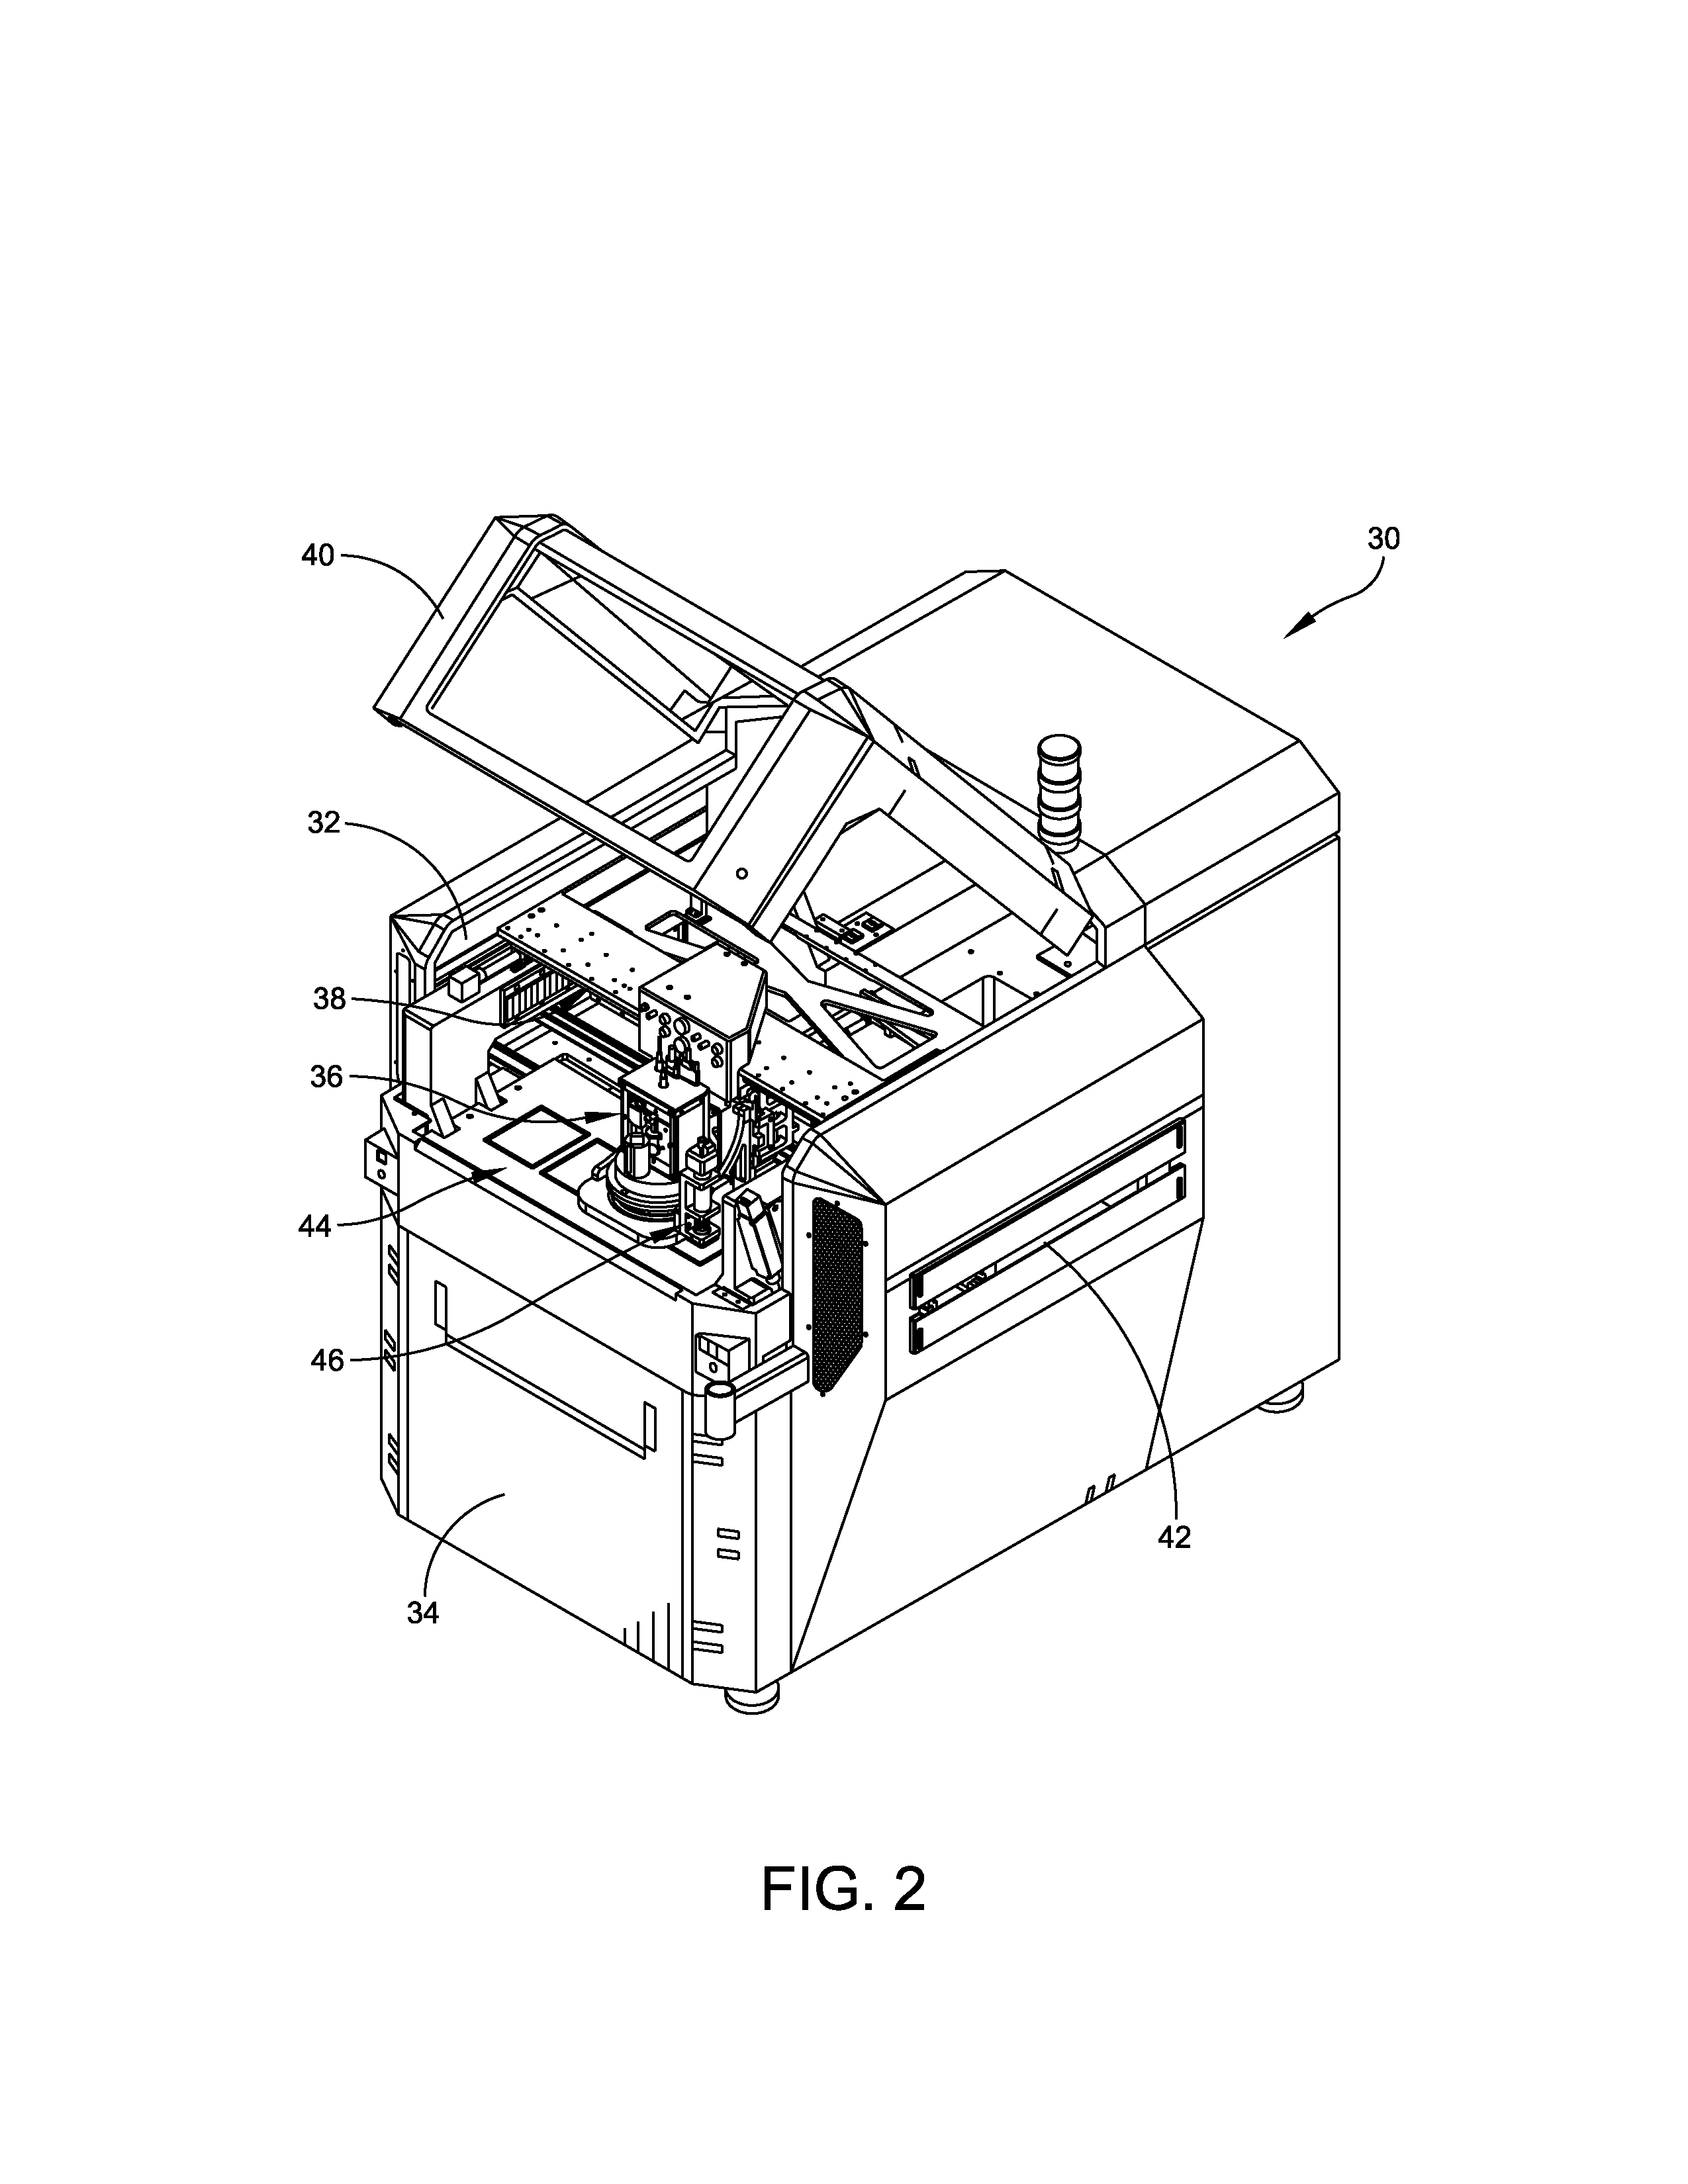 Material deposition system and method for depositing materials on a substrate